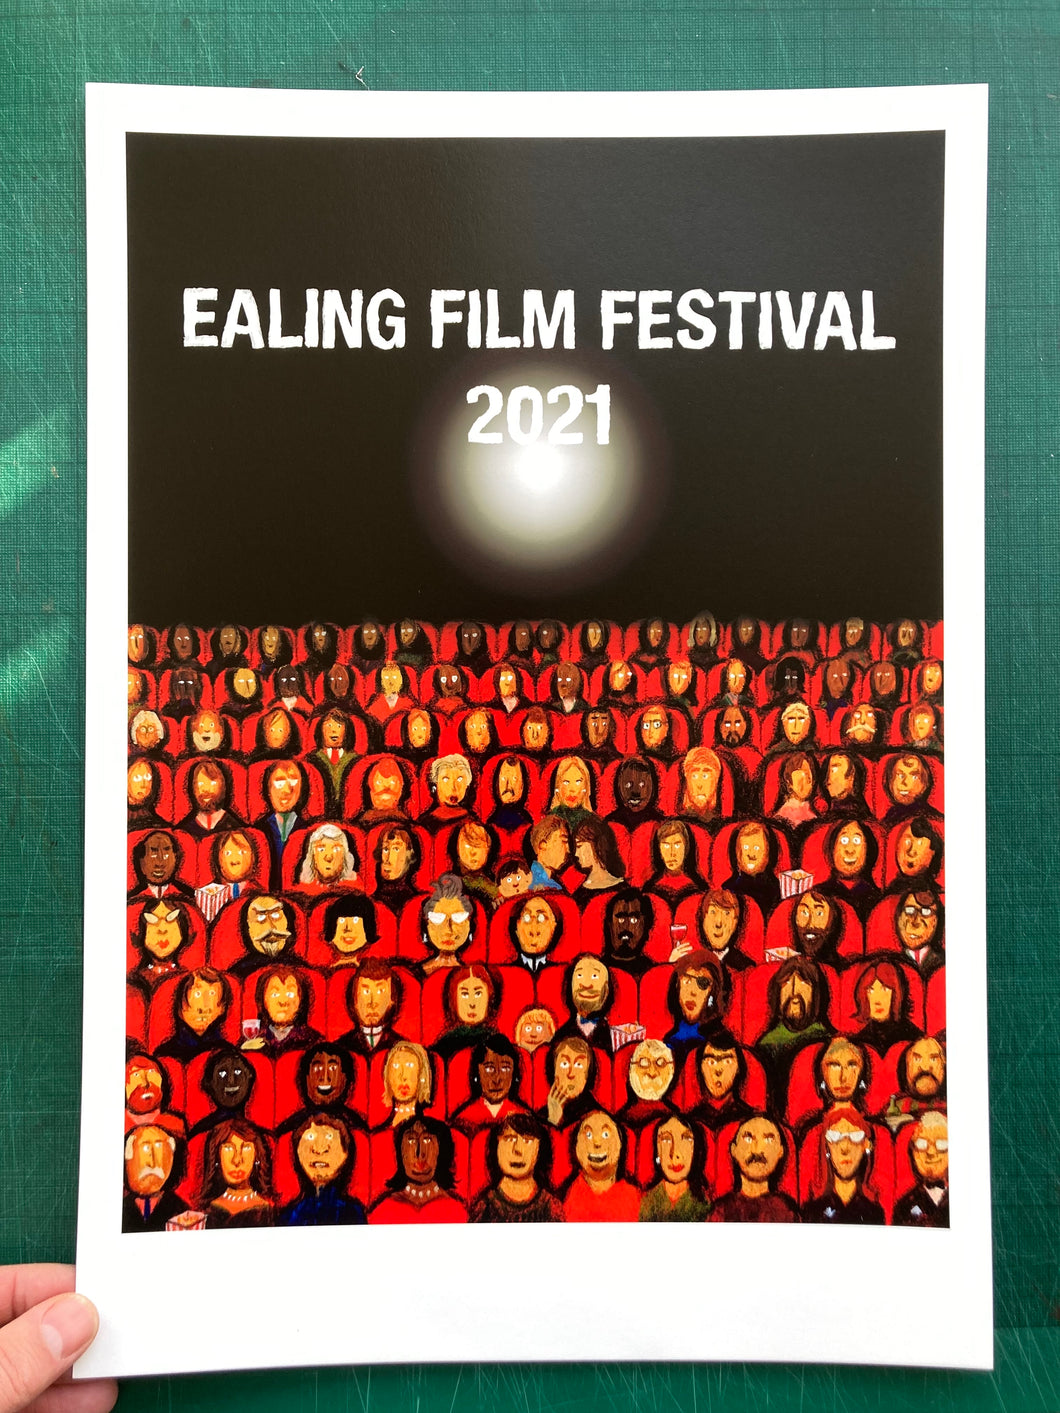 Ealing Film Festival 2021 - Limited edition poster